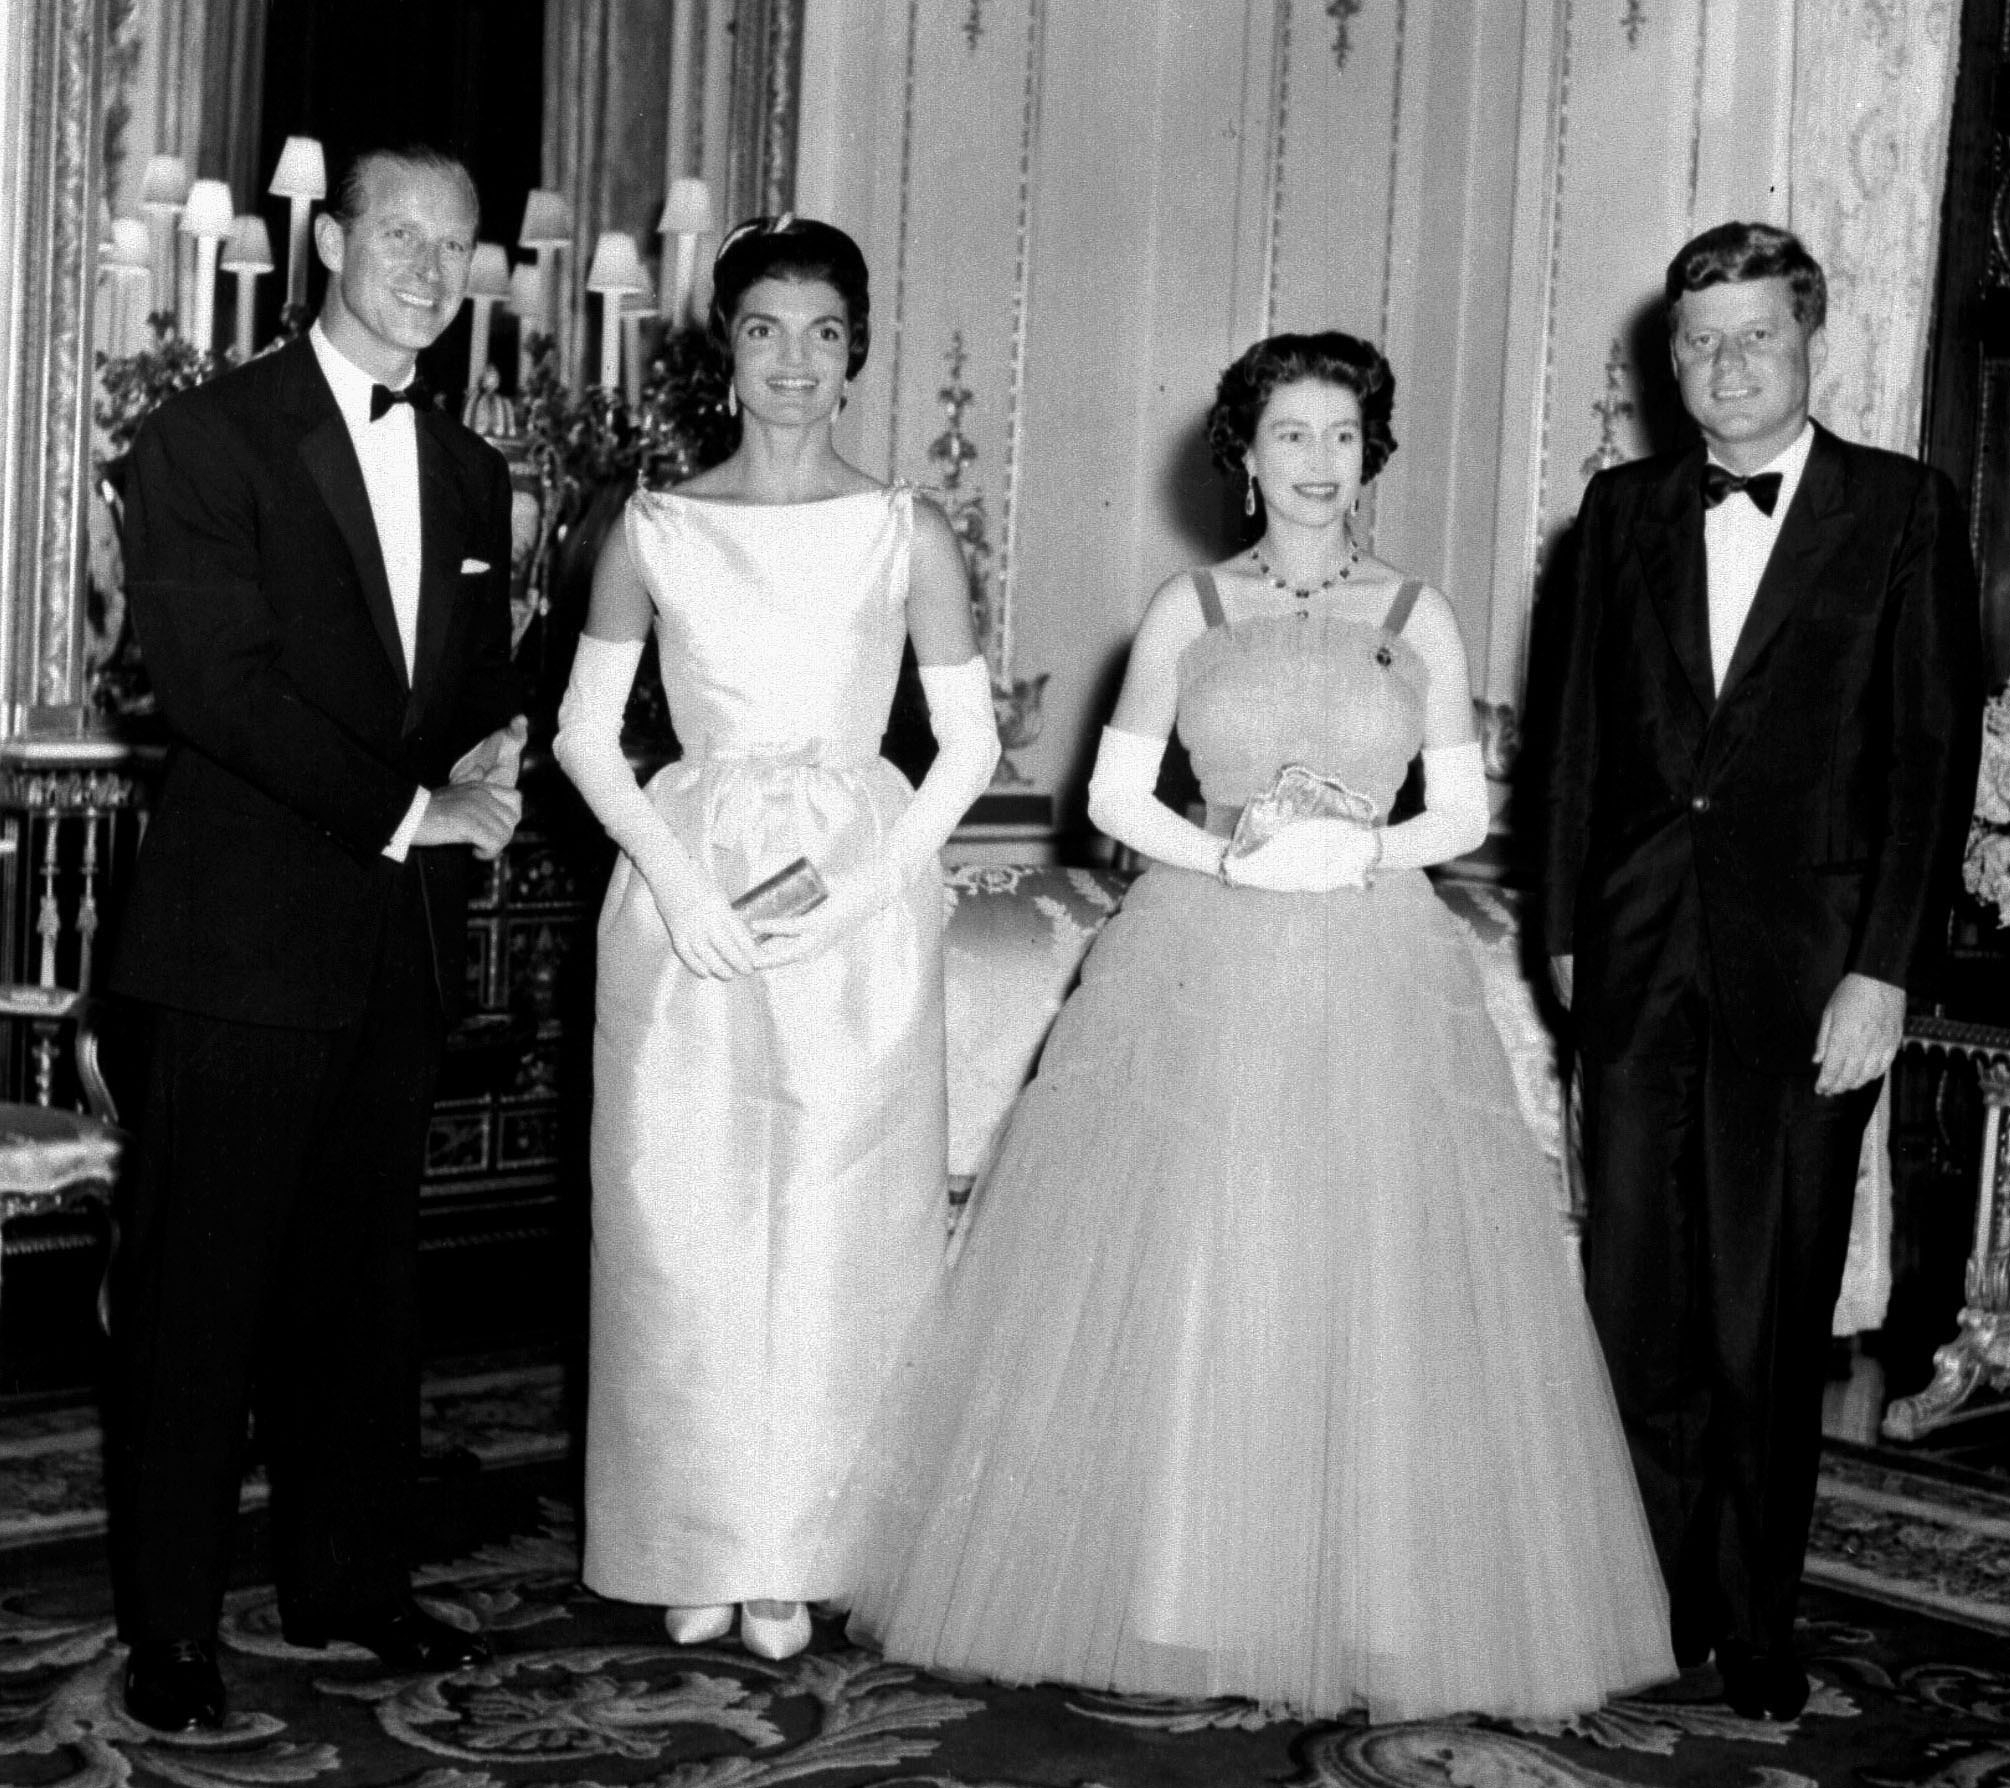  President John Kennedy (right) and his wife Jacqueline (2nd left) pictured with Queen Elizabeth II (2nd right) and the Duke of Edinburgh at Buckingham Palace, in London. The American couple were guests of the Queen and her husband at dinner. 